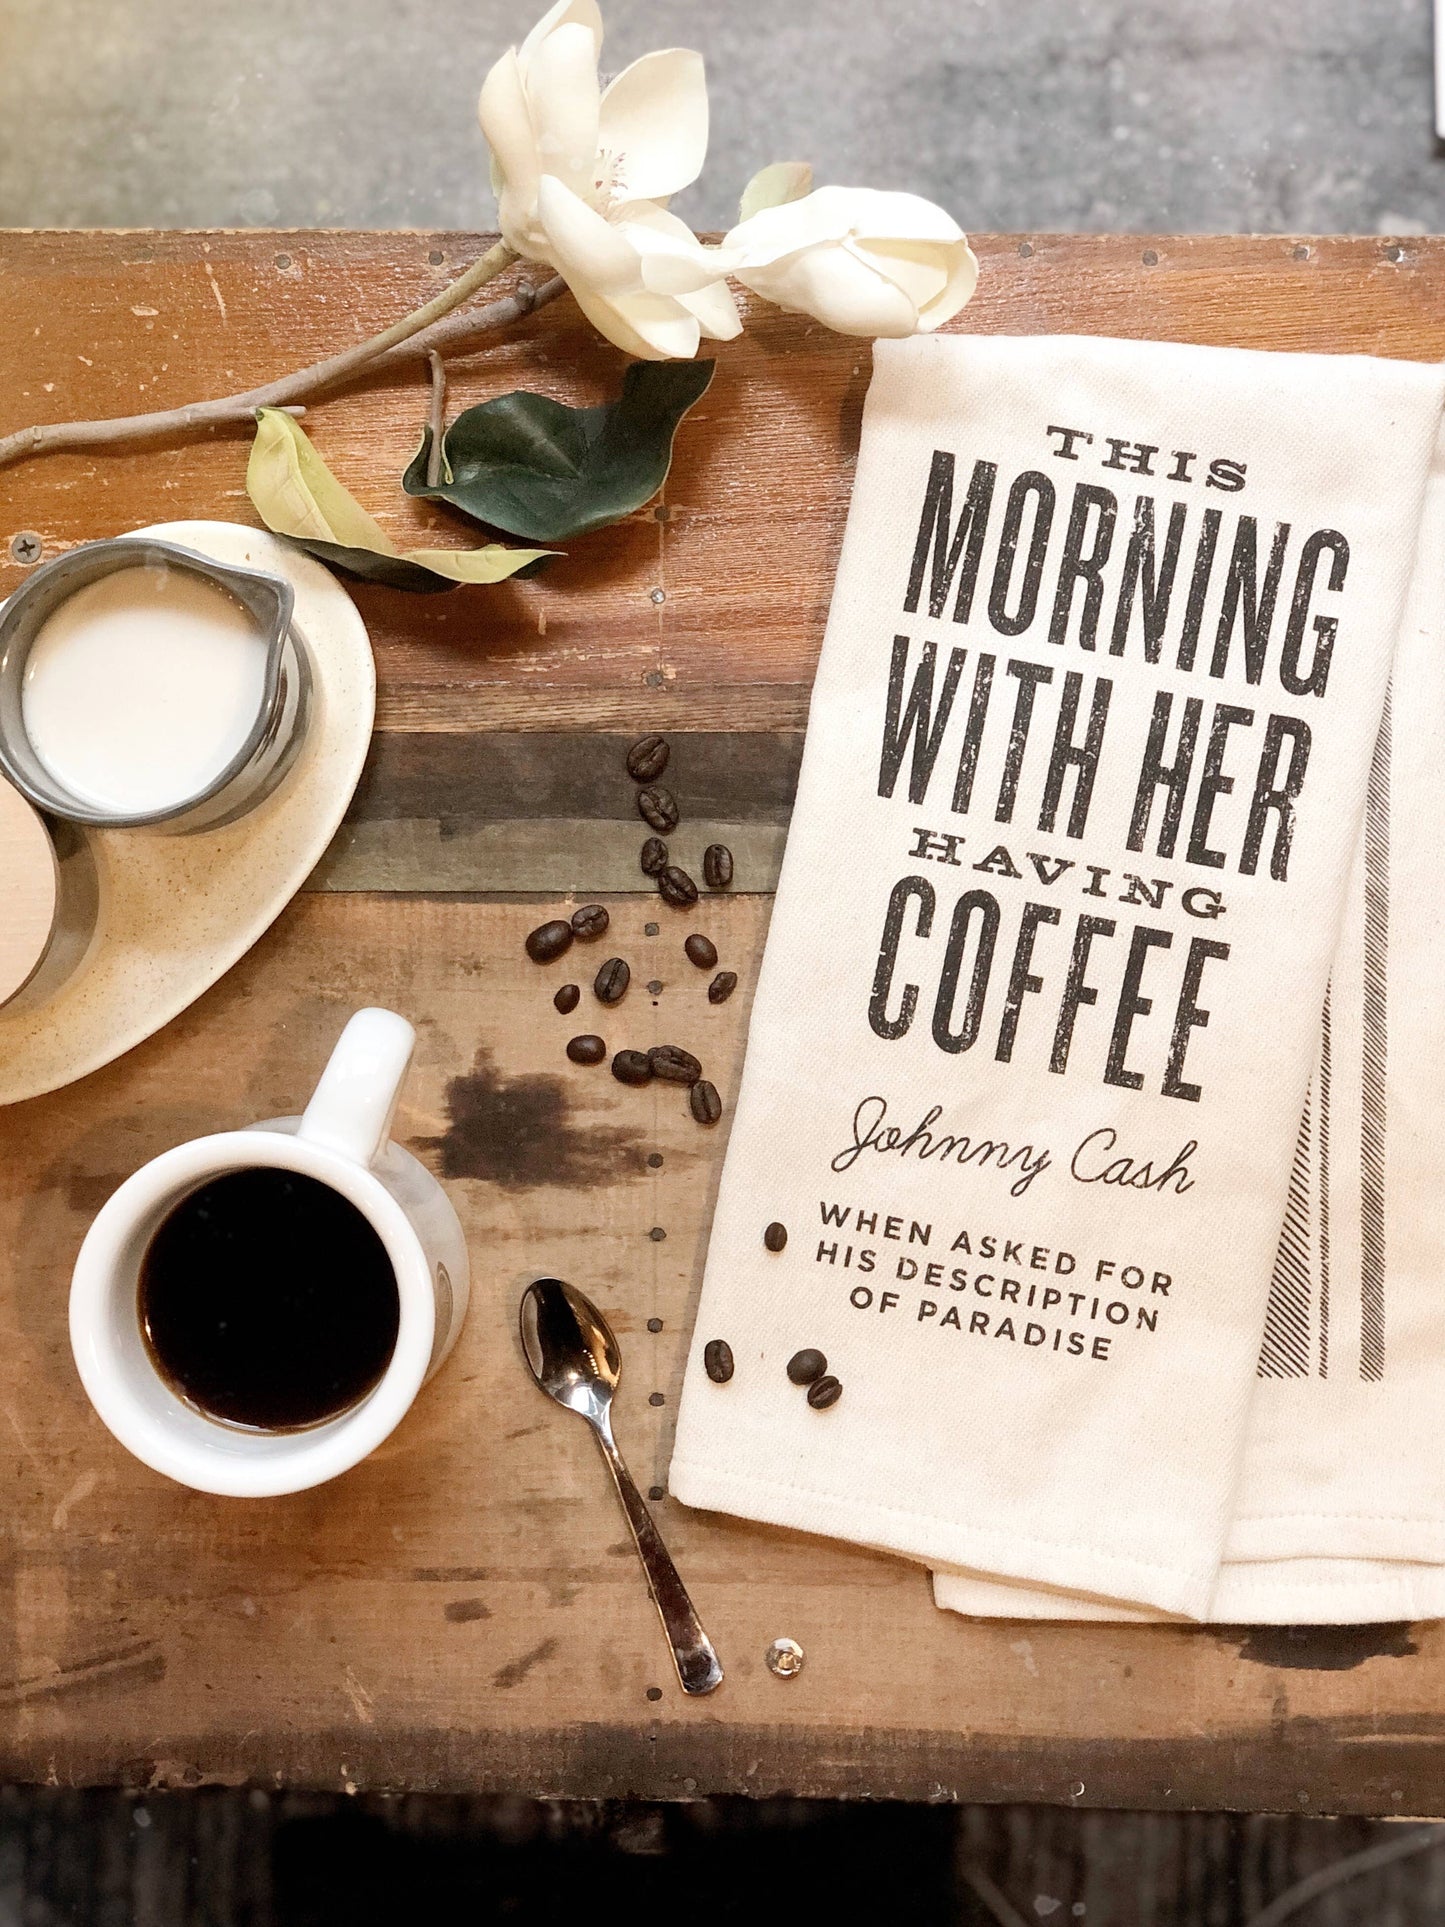 This Morning With Her Having Coffee - Johnny Cash -Towel